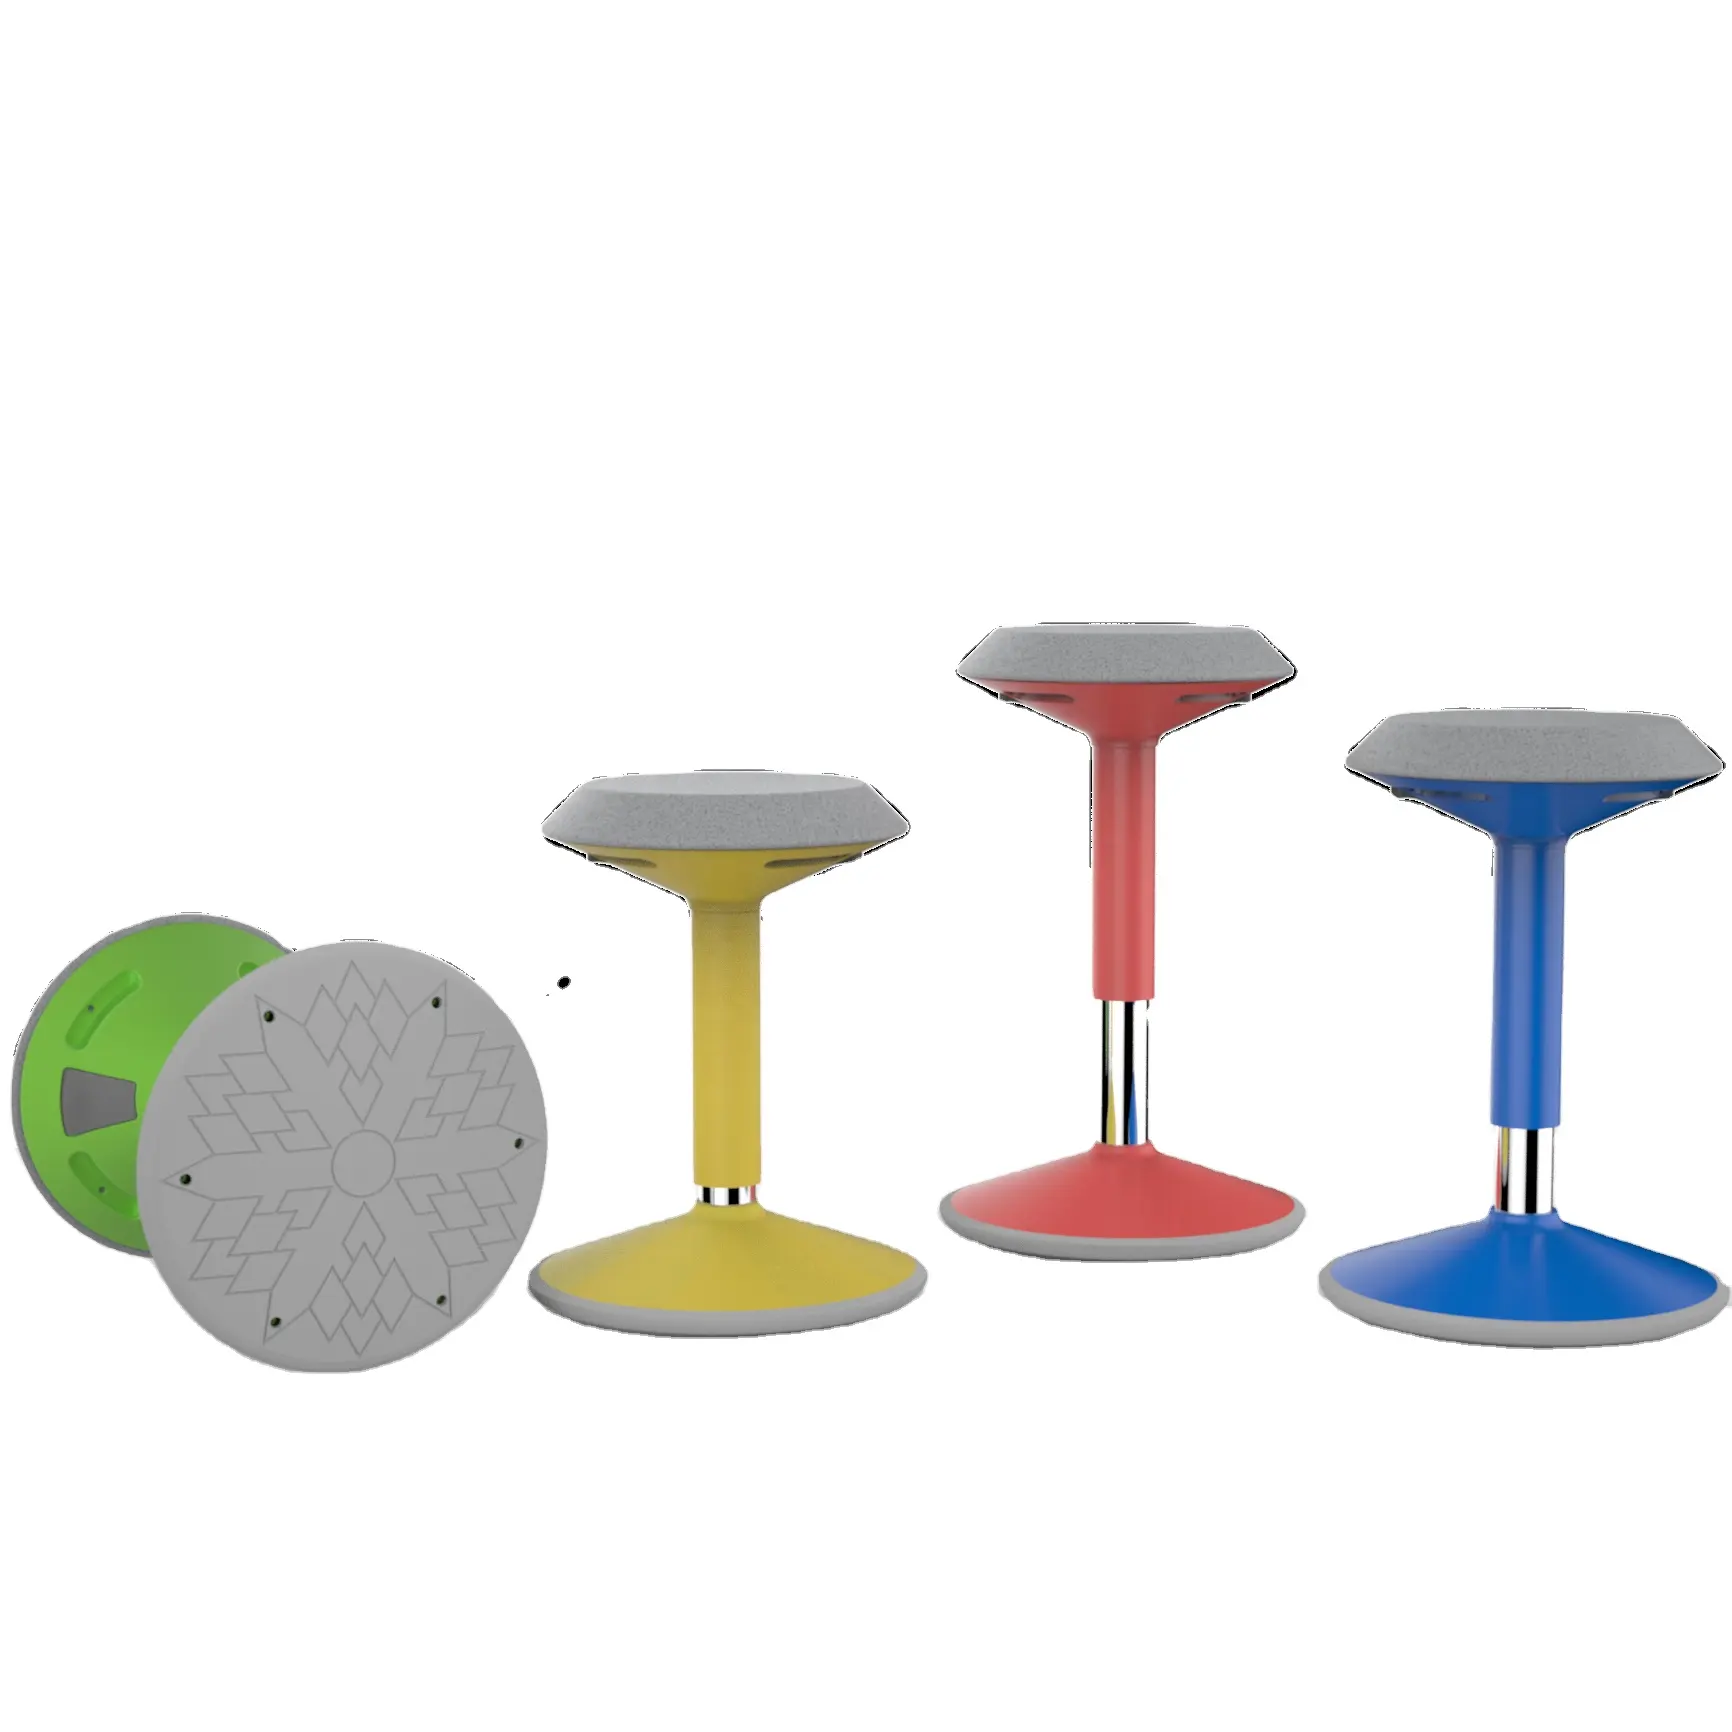 LONKIN Height Adjustable Active Active Learning Wobble Stool Chair